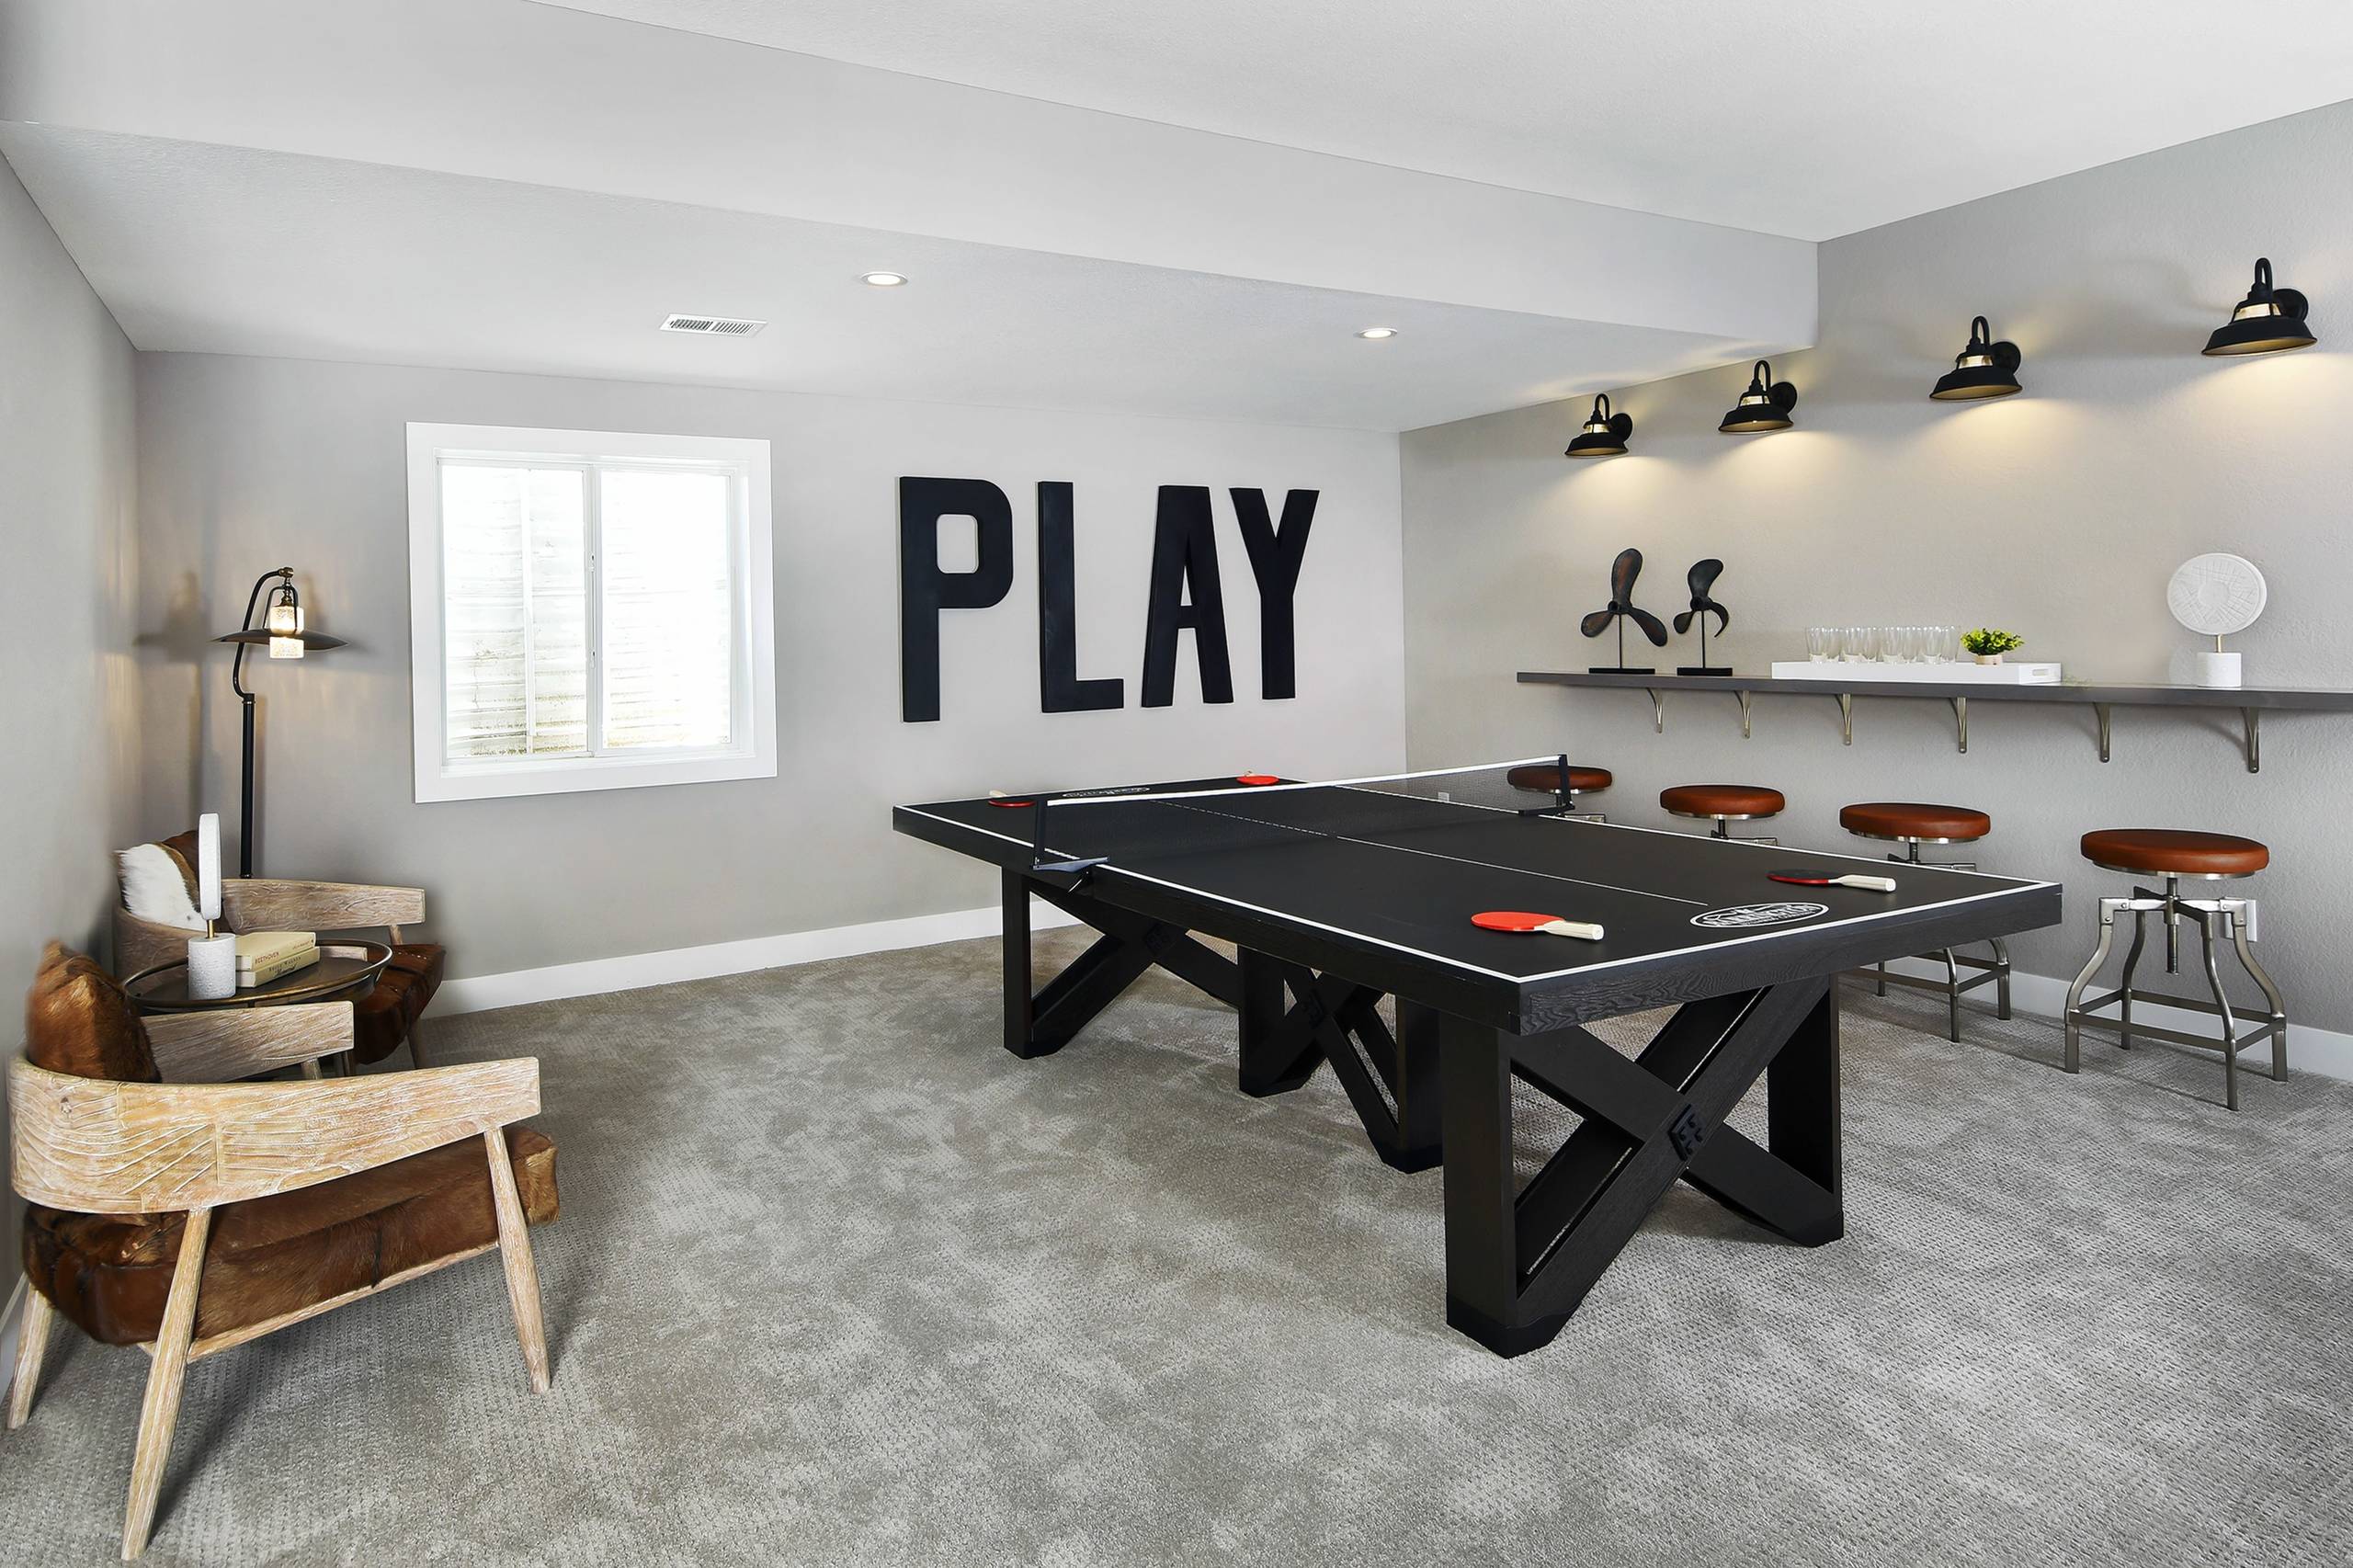 Pin on Game room design